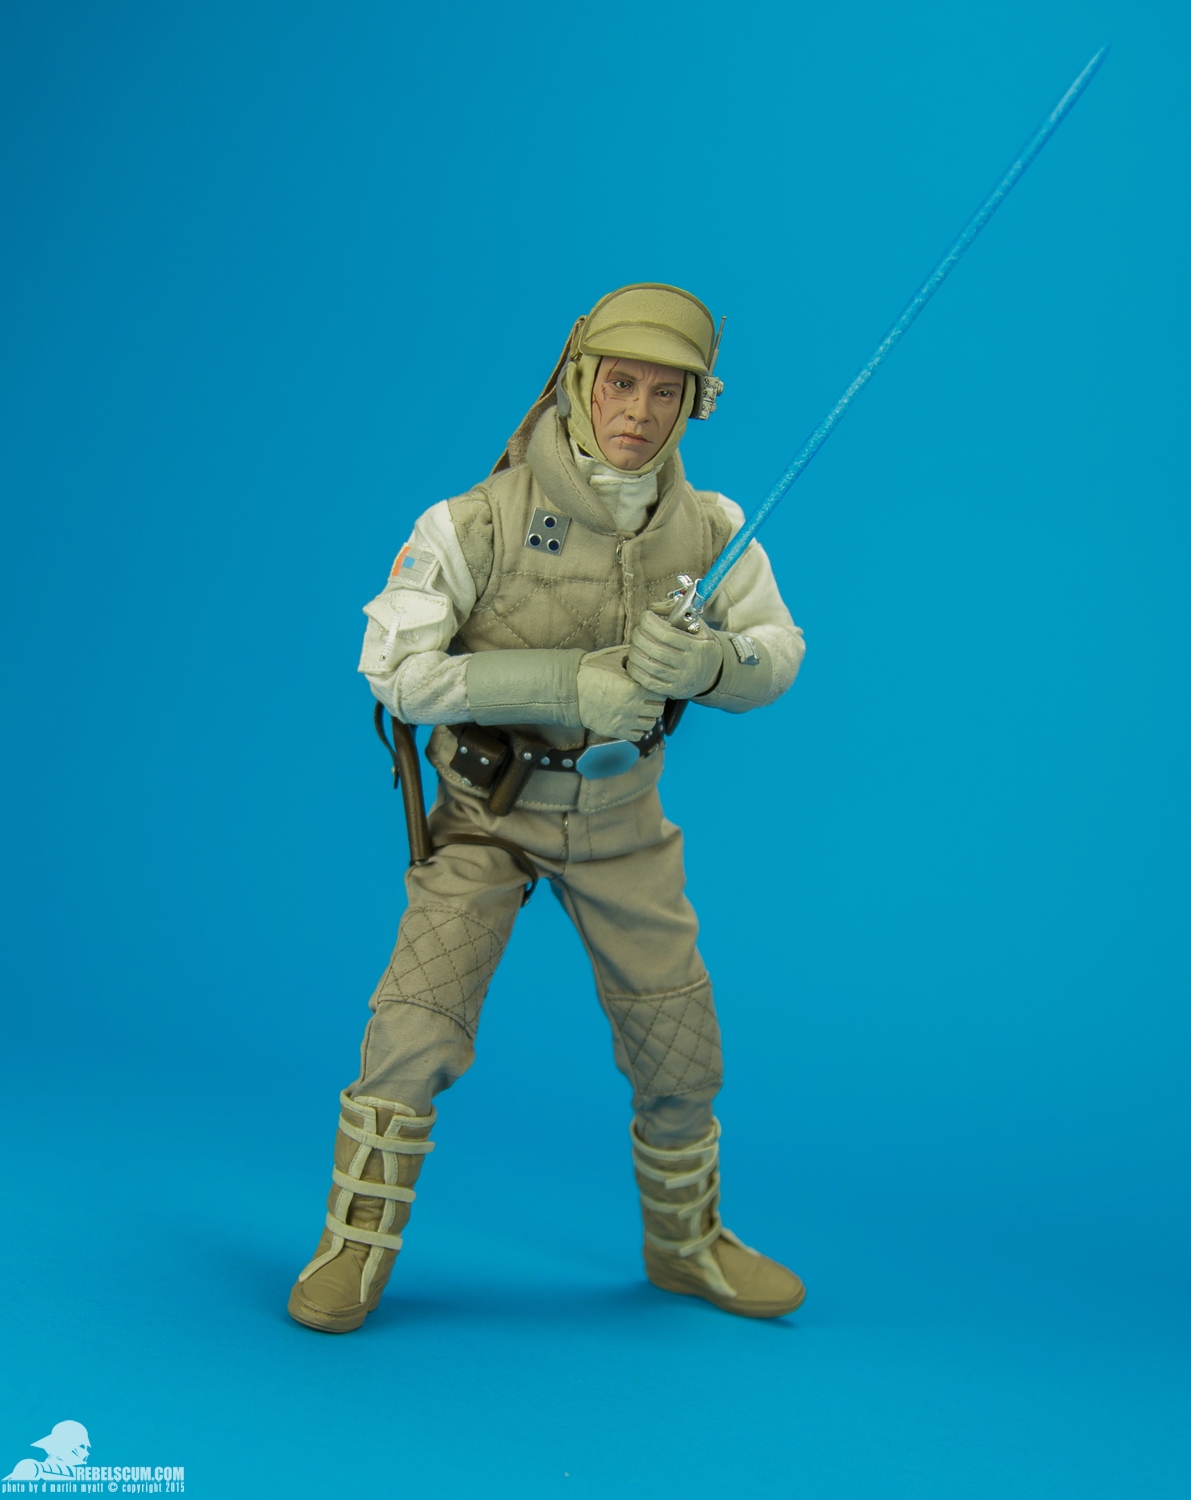 Luke-Skywalker-Hoth-Sixth-Scale-Sideshow-Collectibles-Star-Wars-037.jpg